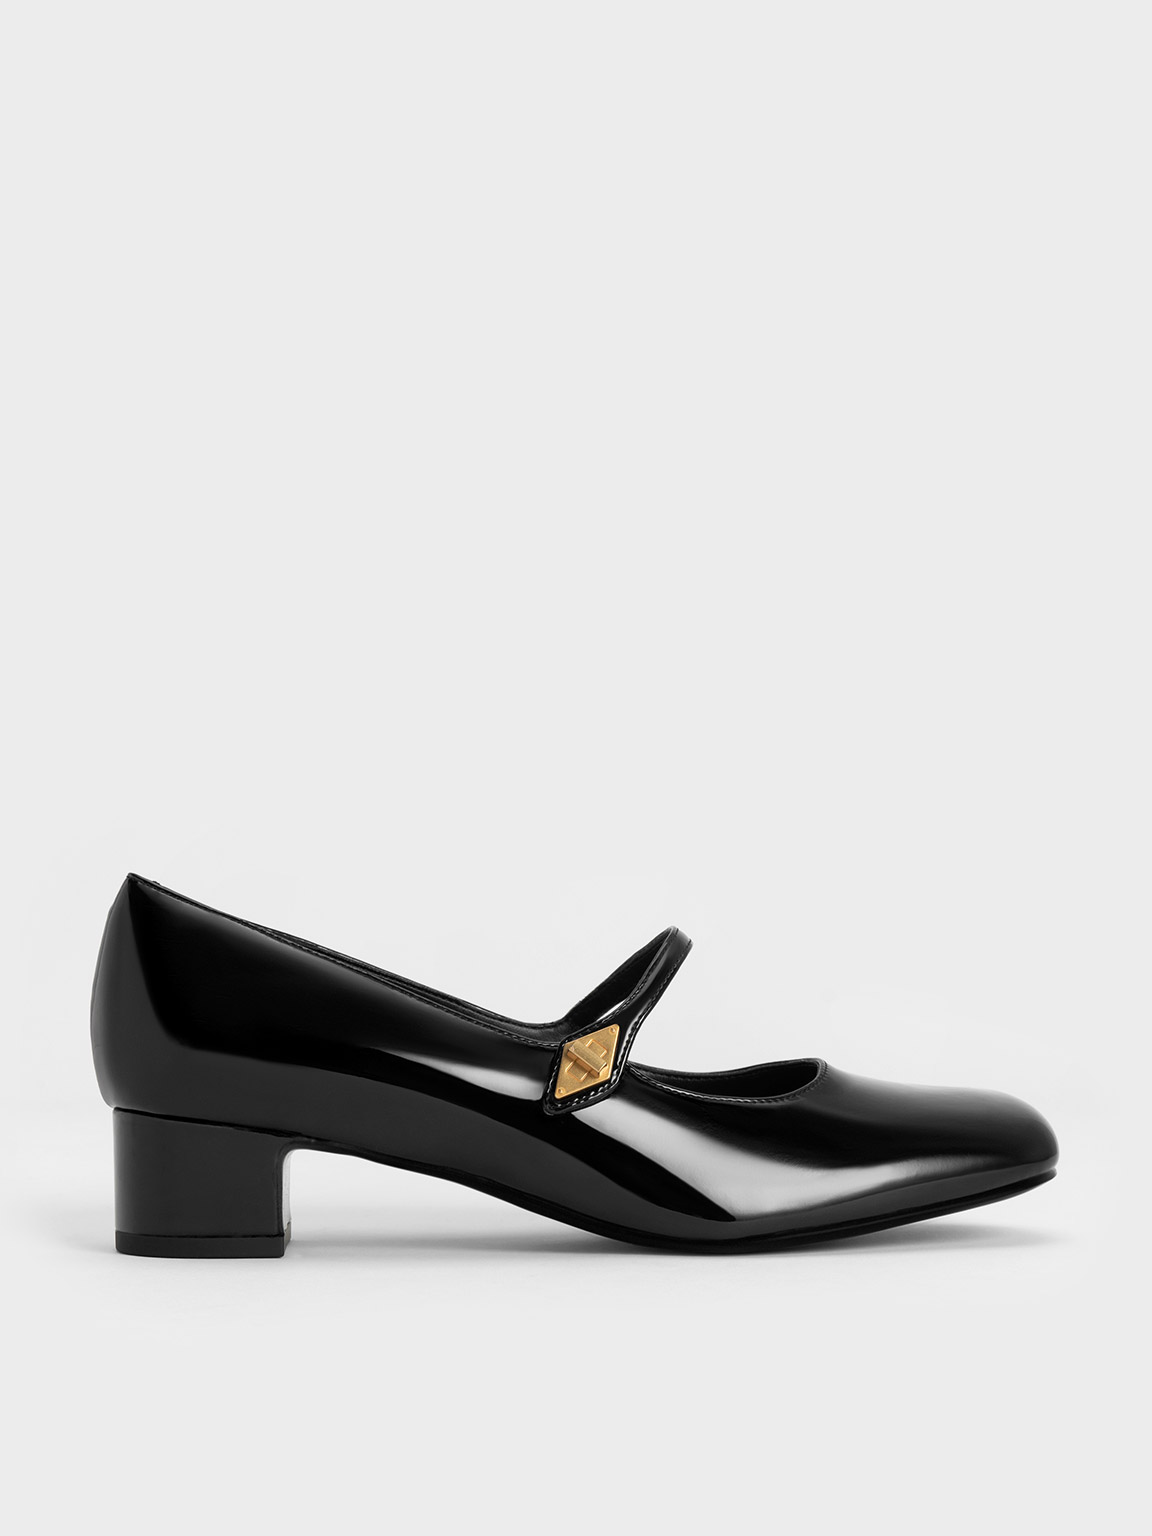 Black Patent Metallic Accent Mary Jane Pumps | CHARLES & KEITH